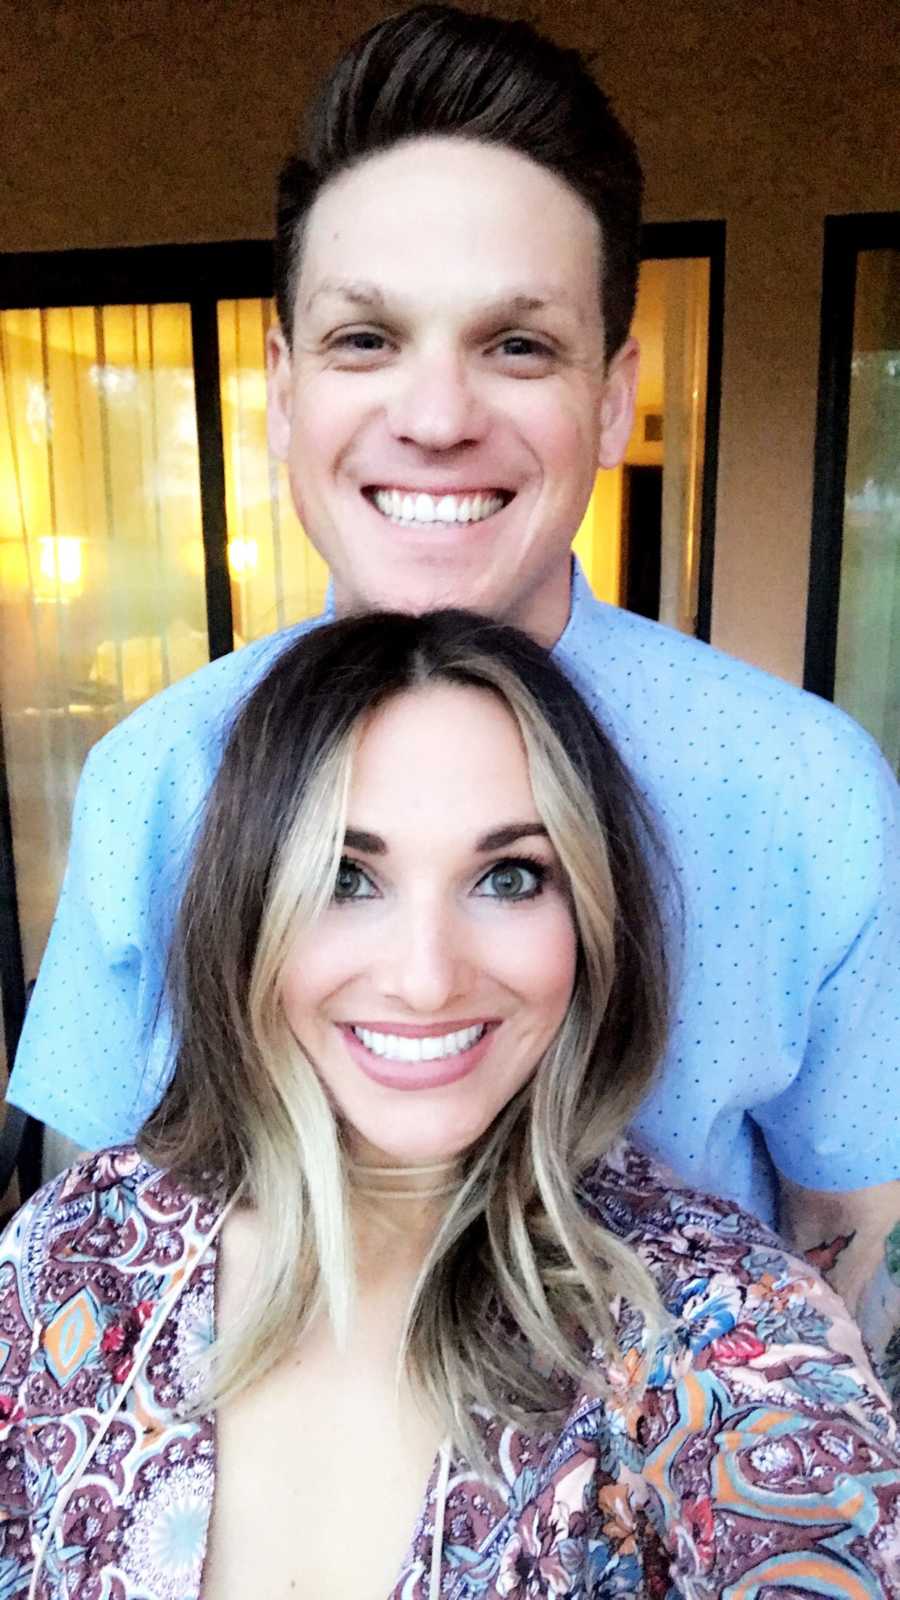 Woman smiles in selfie while her husband stands smiling behind her